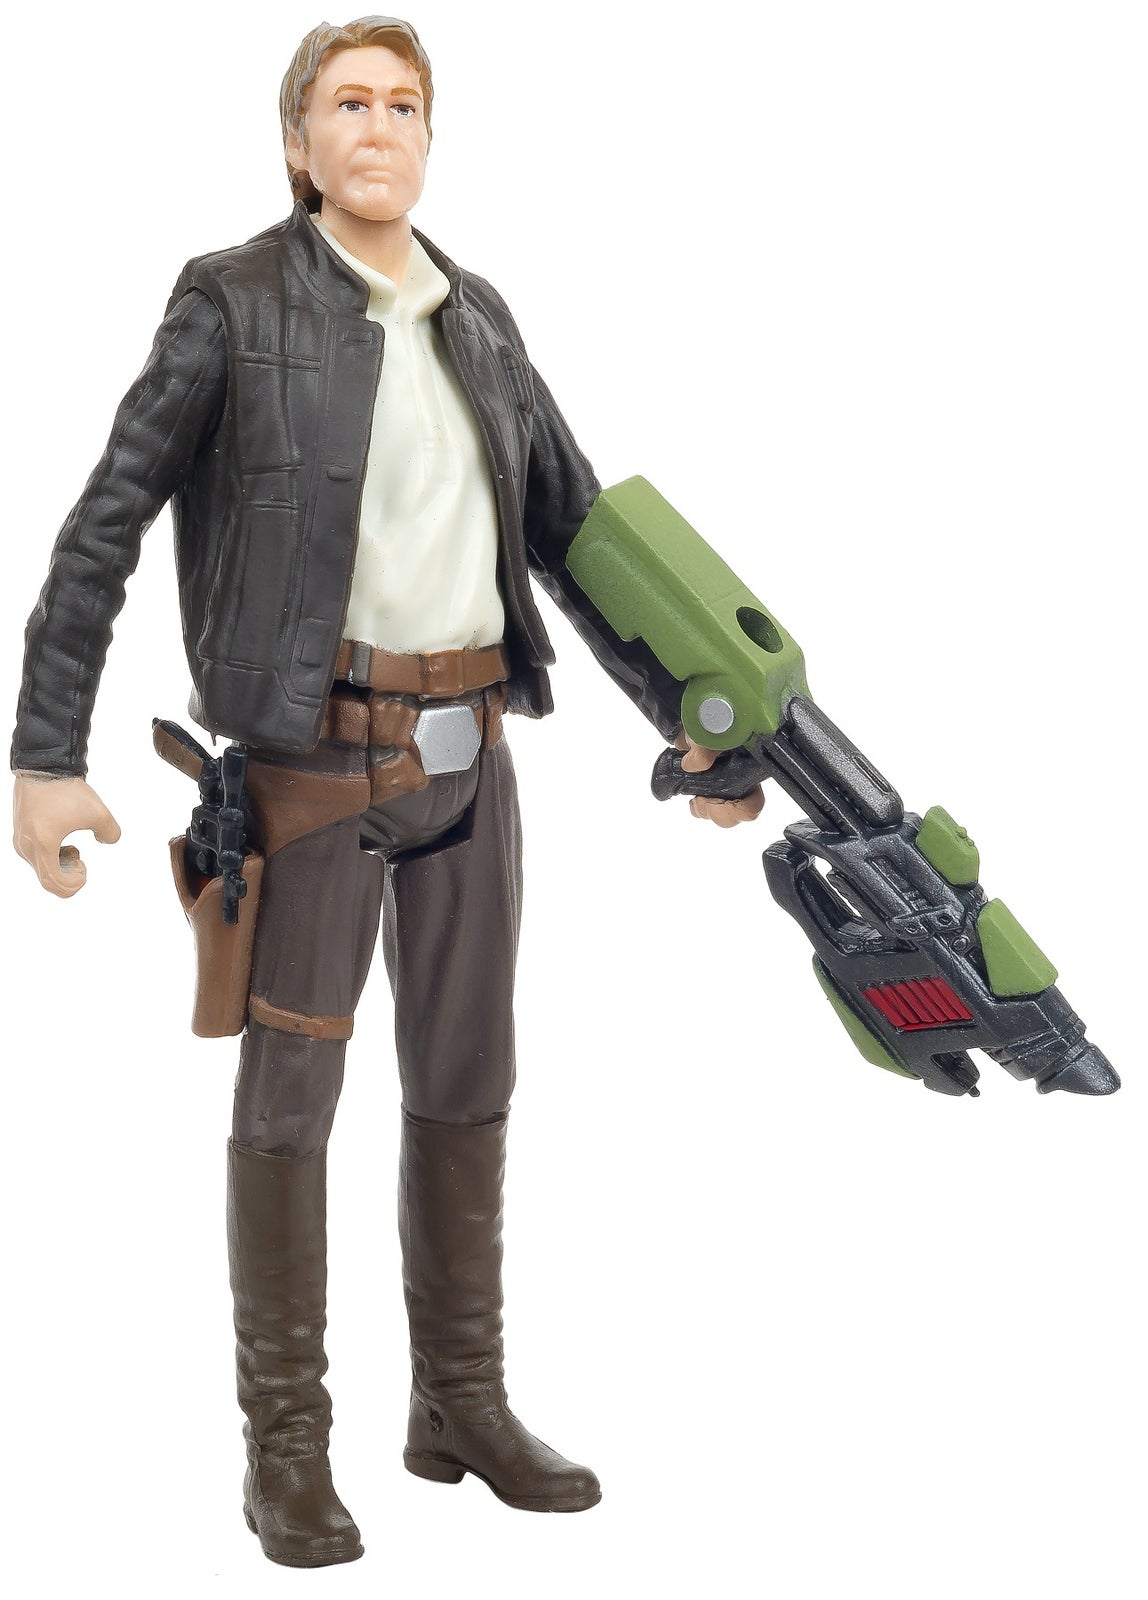 0//Star Wars\\0 Han Solo - The Force Awakens -